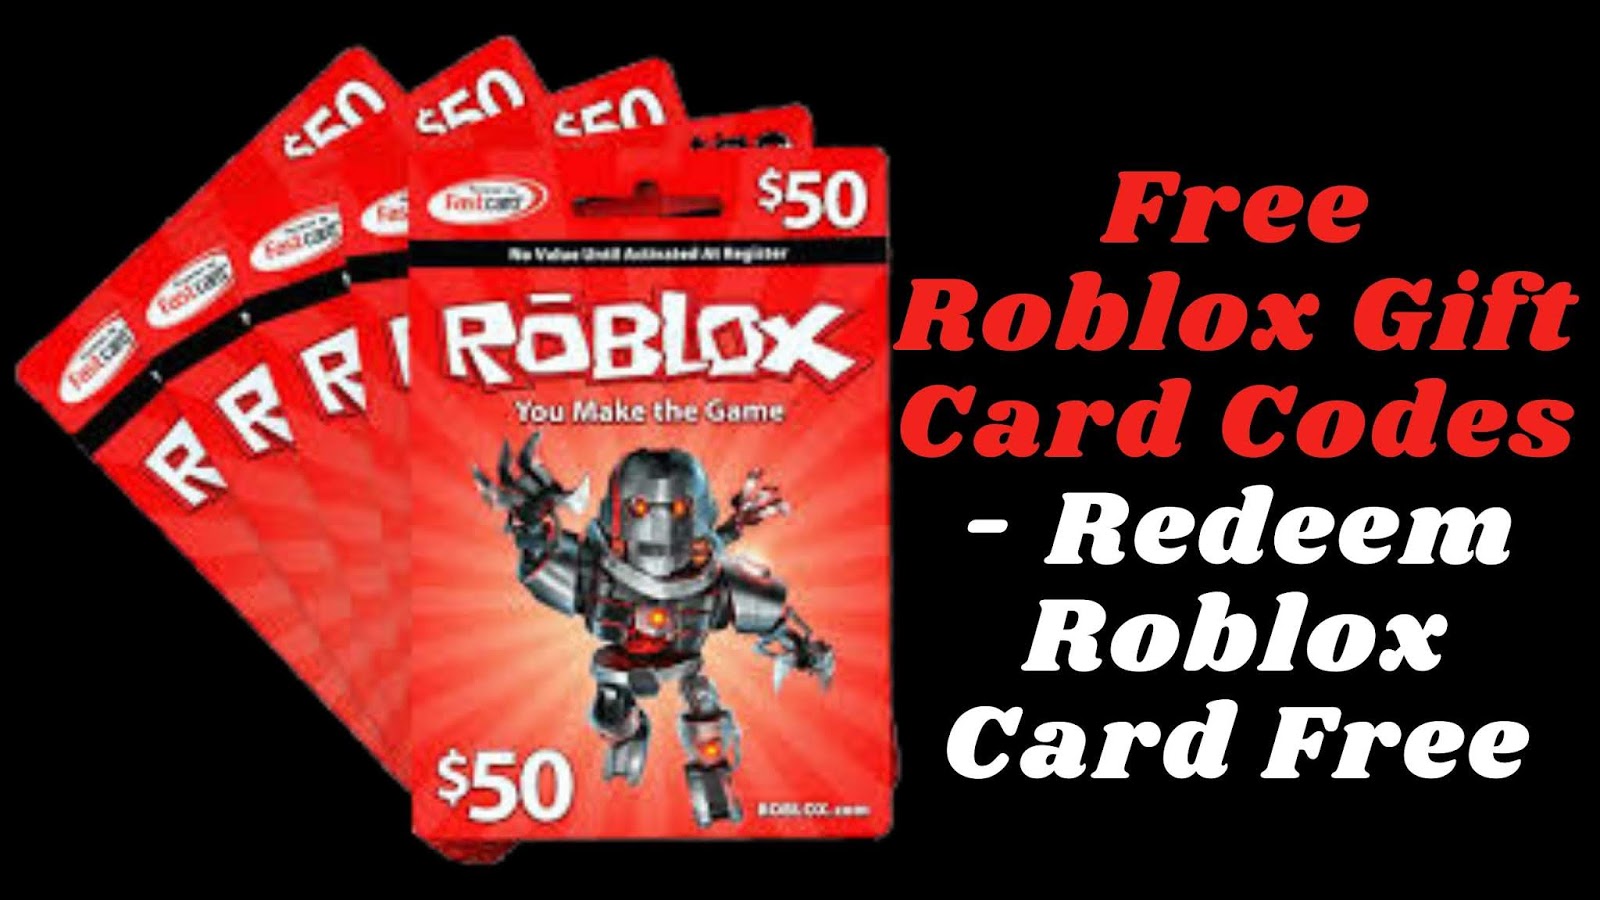 Free Gift Cards Free Roblox Gift Card Codes Redeem Roblox Card Free - free roblox in roblox